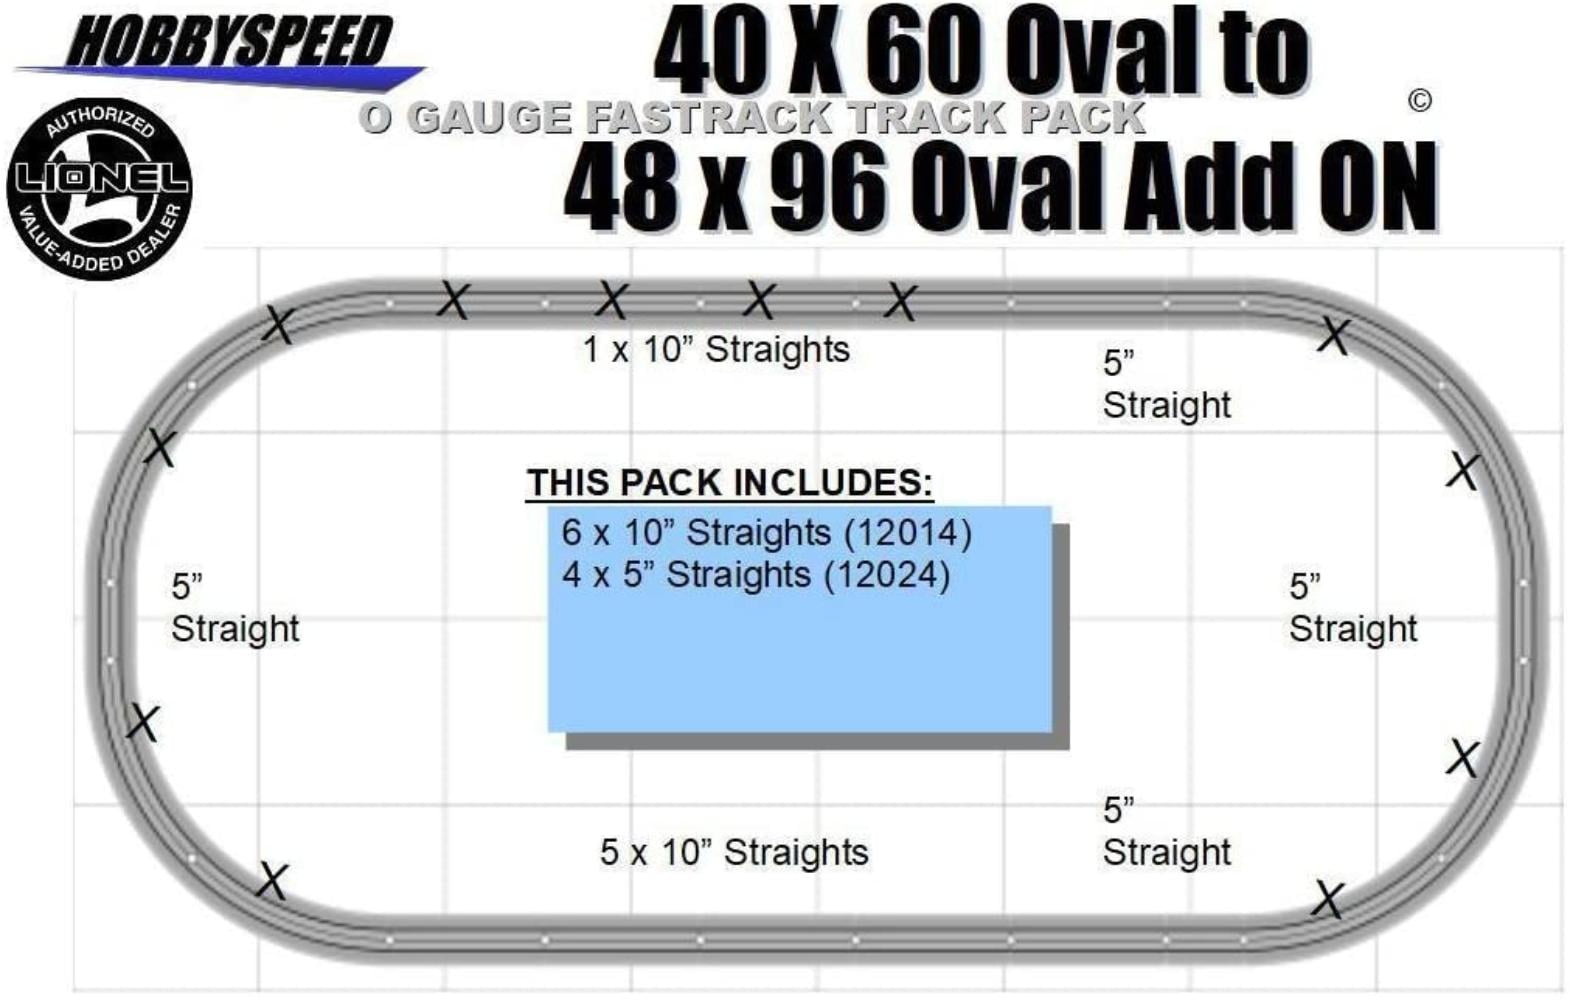 LIONEL FASTRACK 40X60 TWICE AROUND ADD-ON-PACK TRACK SET conversion layout NEW 